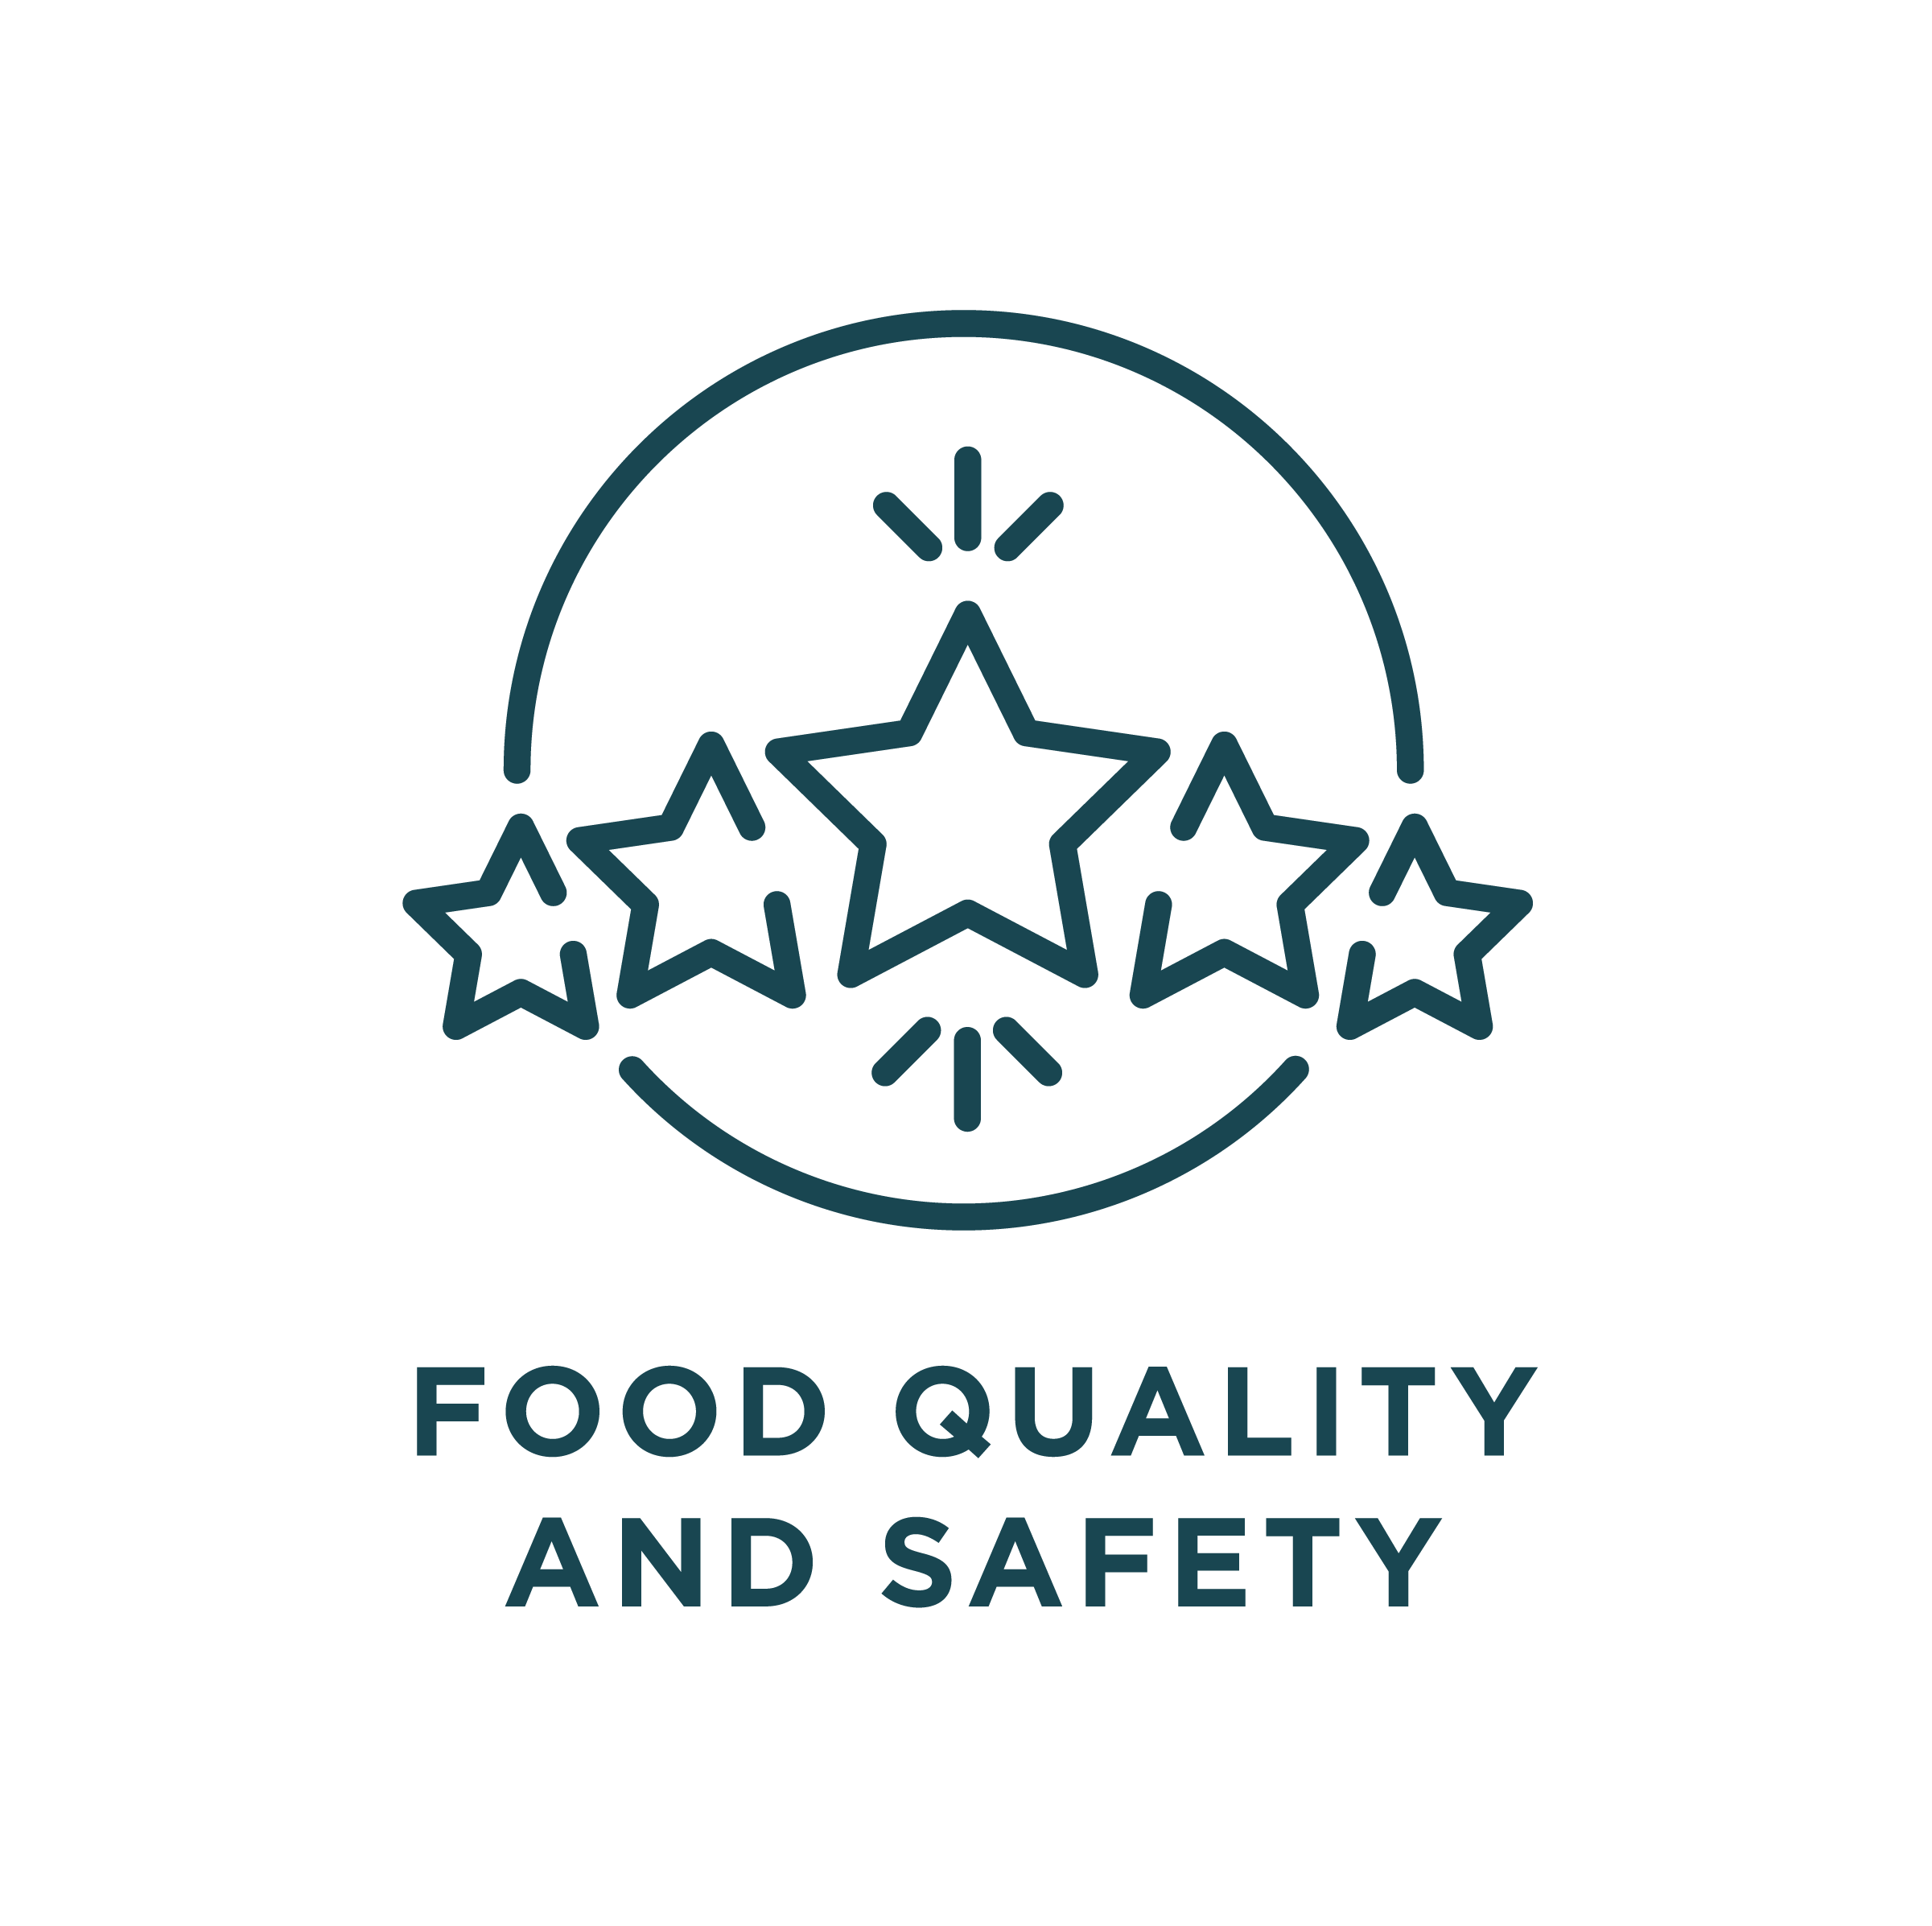 Food Quality and Safety logo